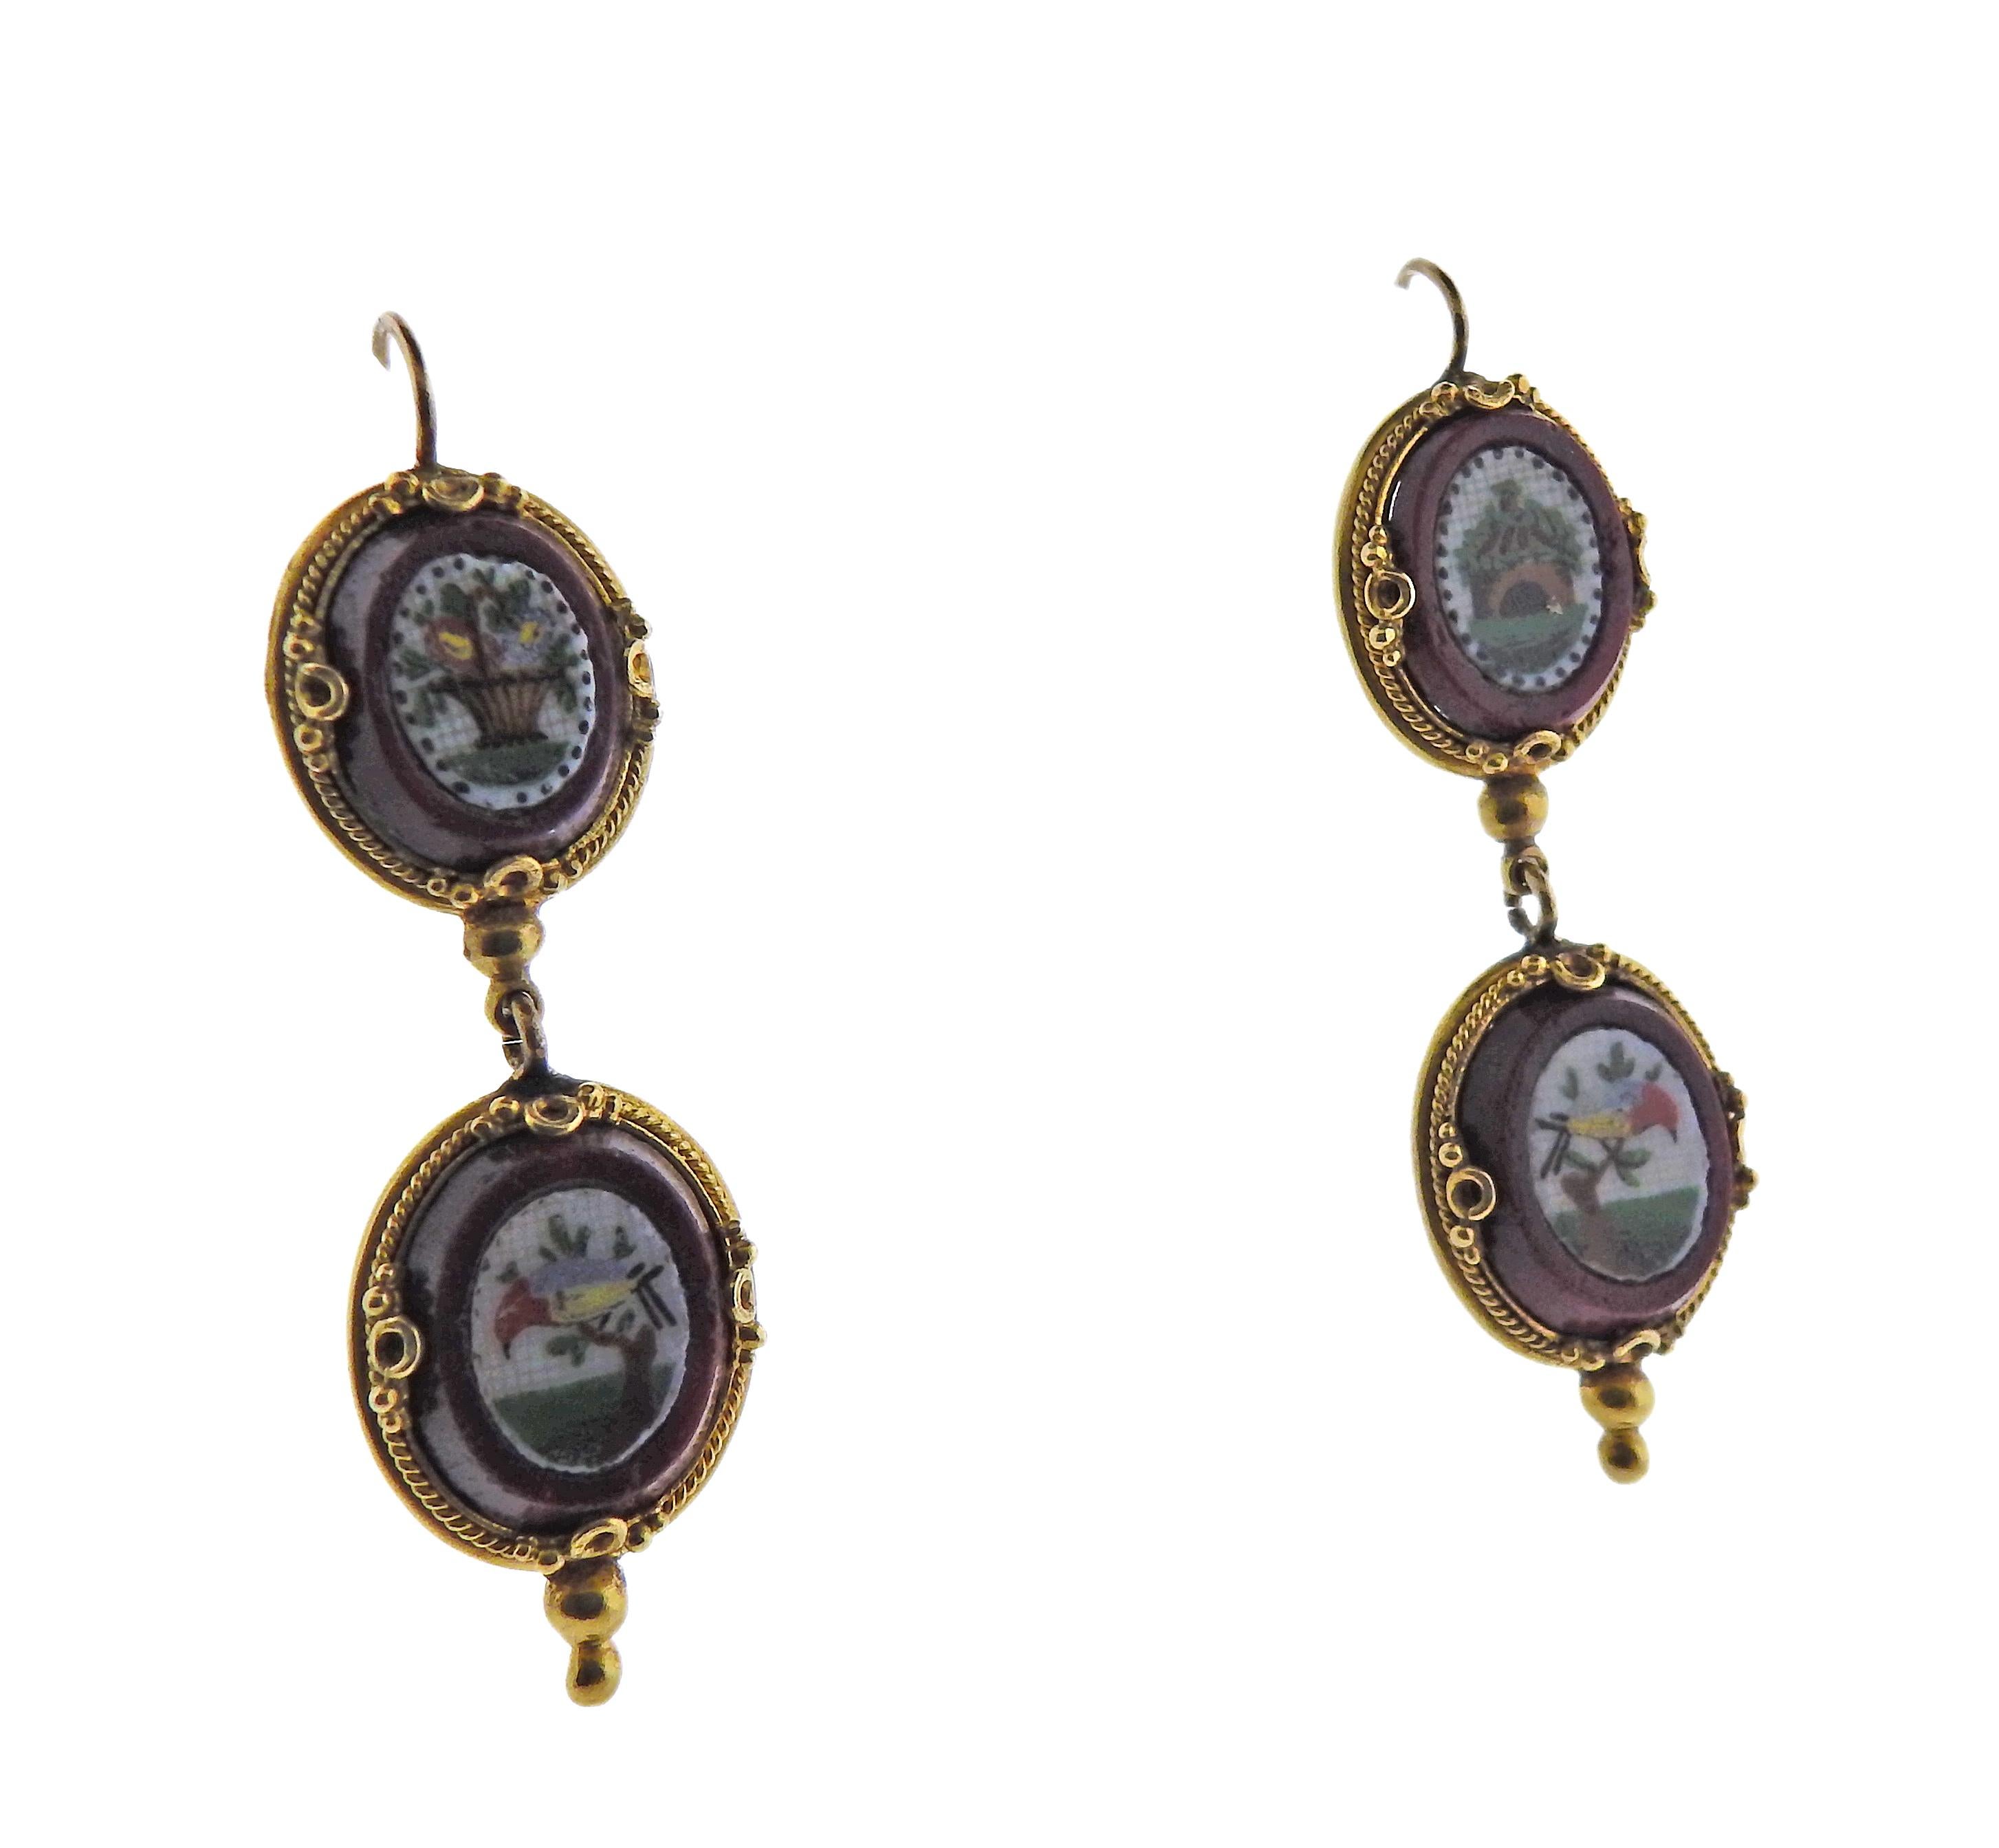 Pair of 18k gold antique earring with hard stone micro mosaic ornaments. Earrings are 45mm x 14mm. Weight - 12.5 grams.